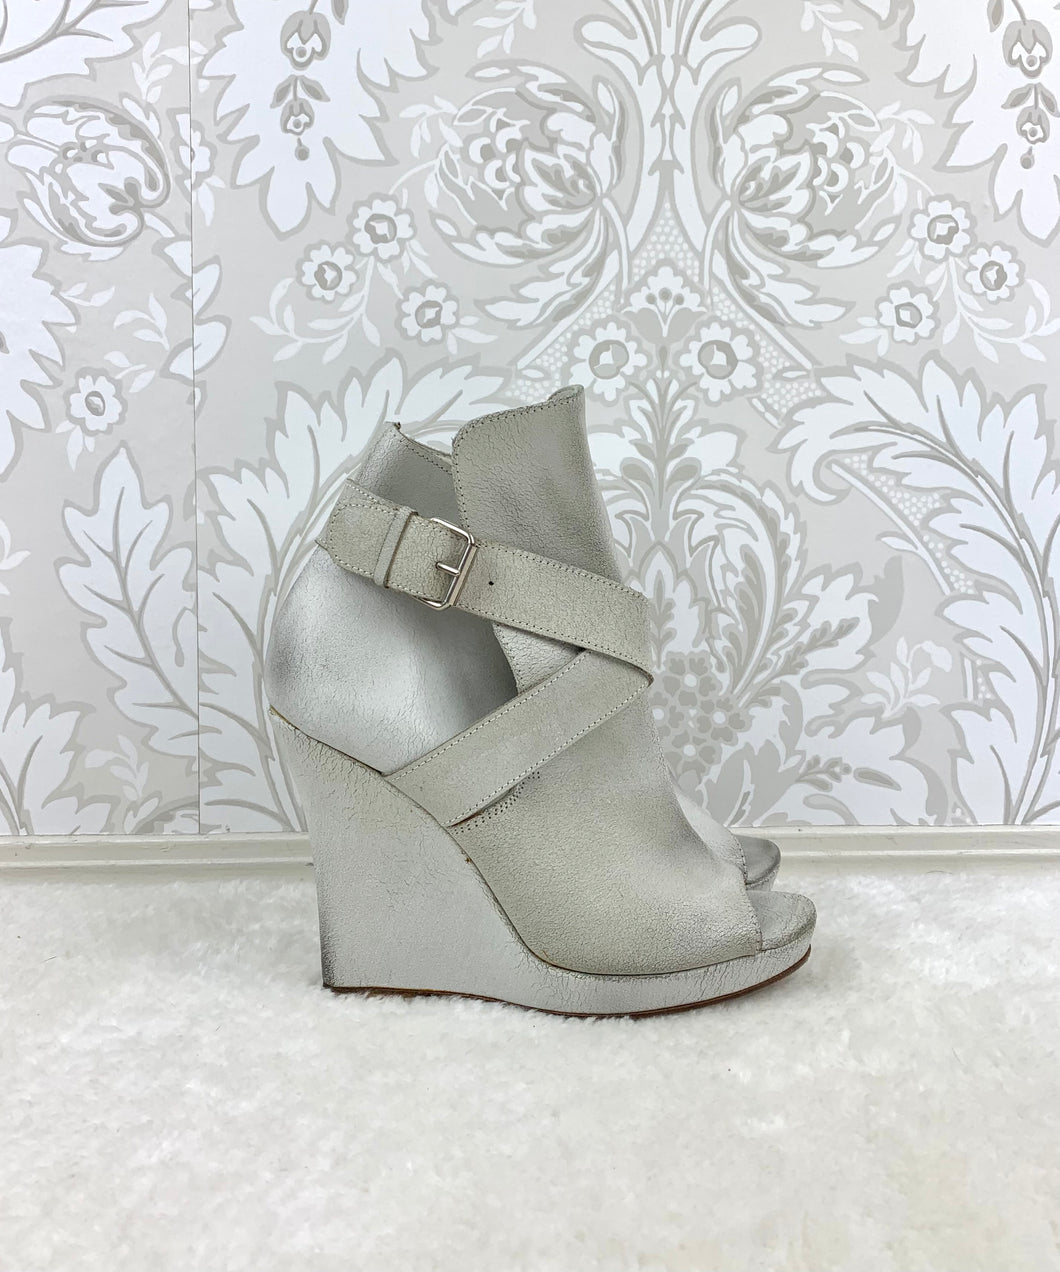 Masnada Distressed Leather Booties size 38